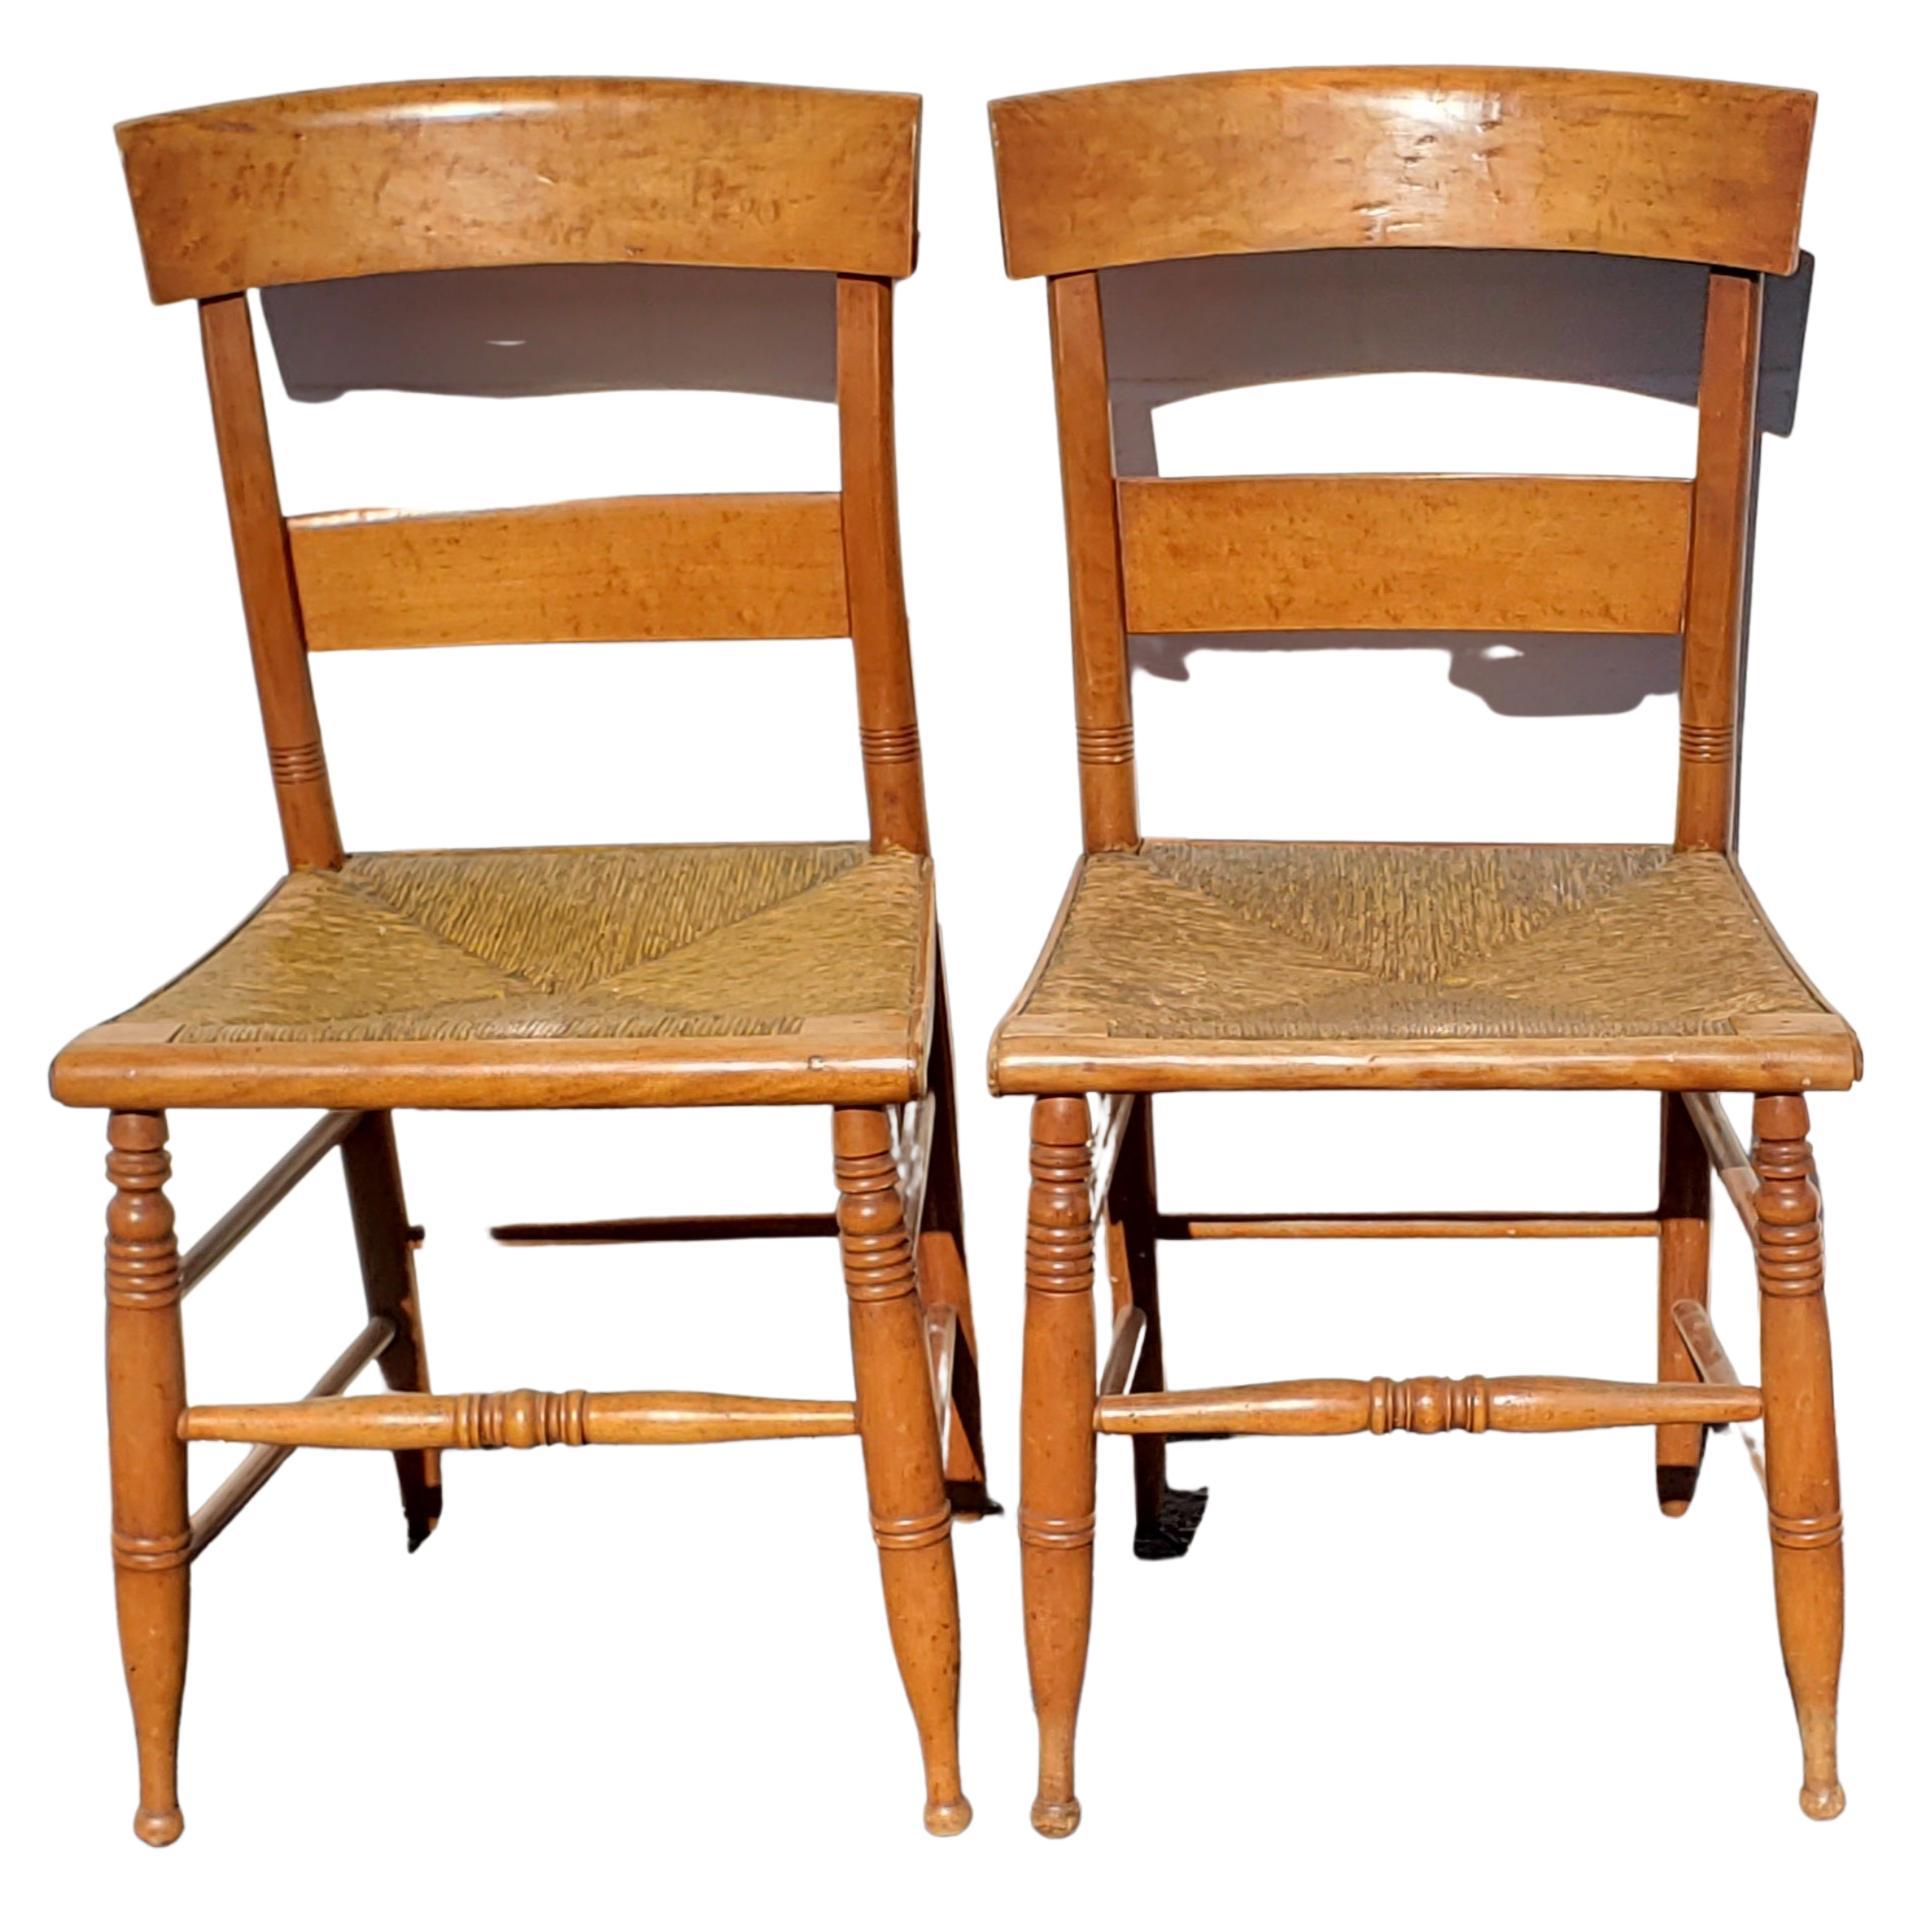 Hand-Crafted Antique Tiger Maple Bentwood Slat Back with Rush Seat Dining Chairs, circa 1860s